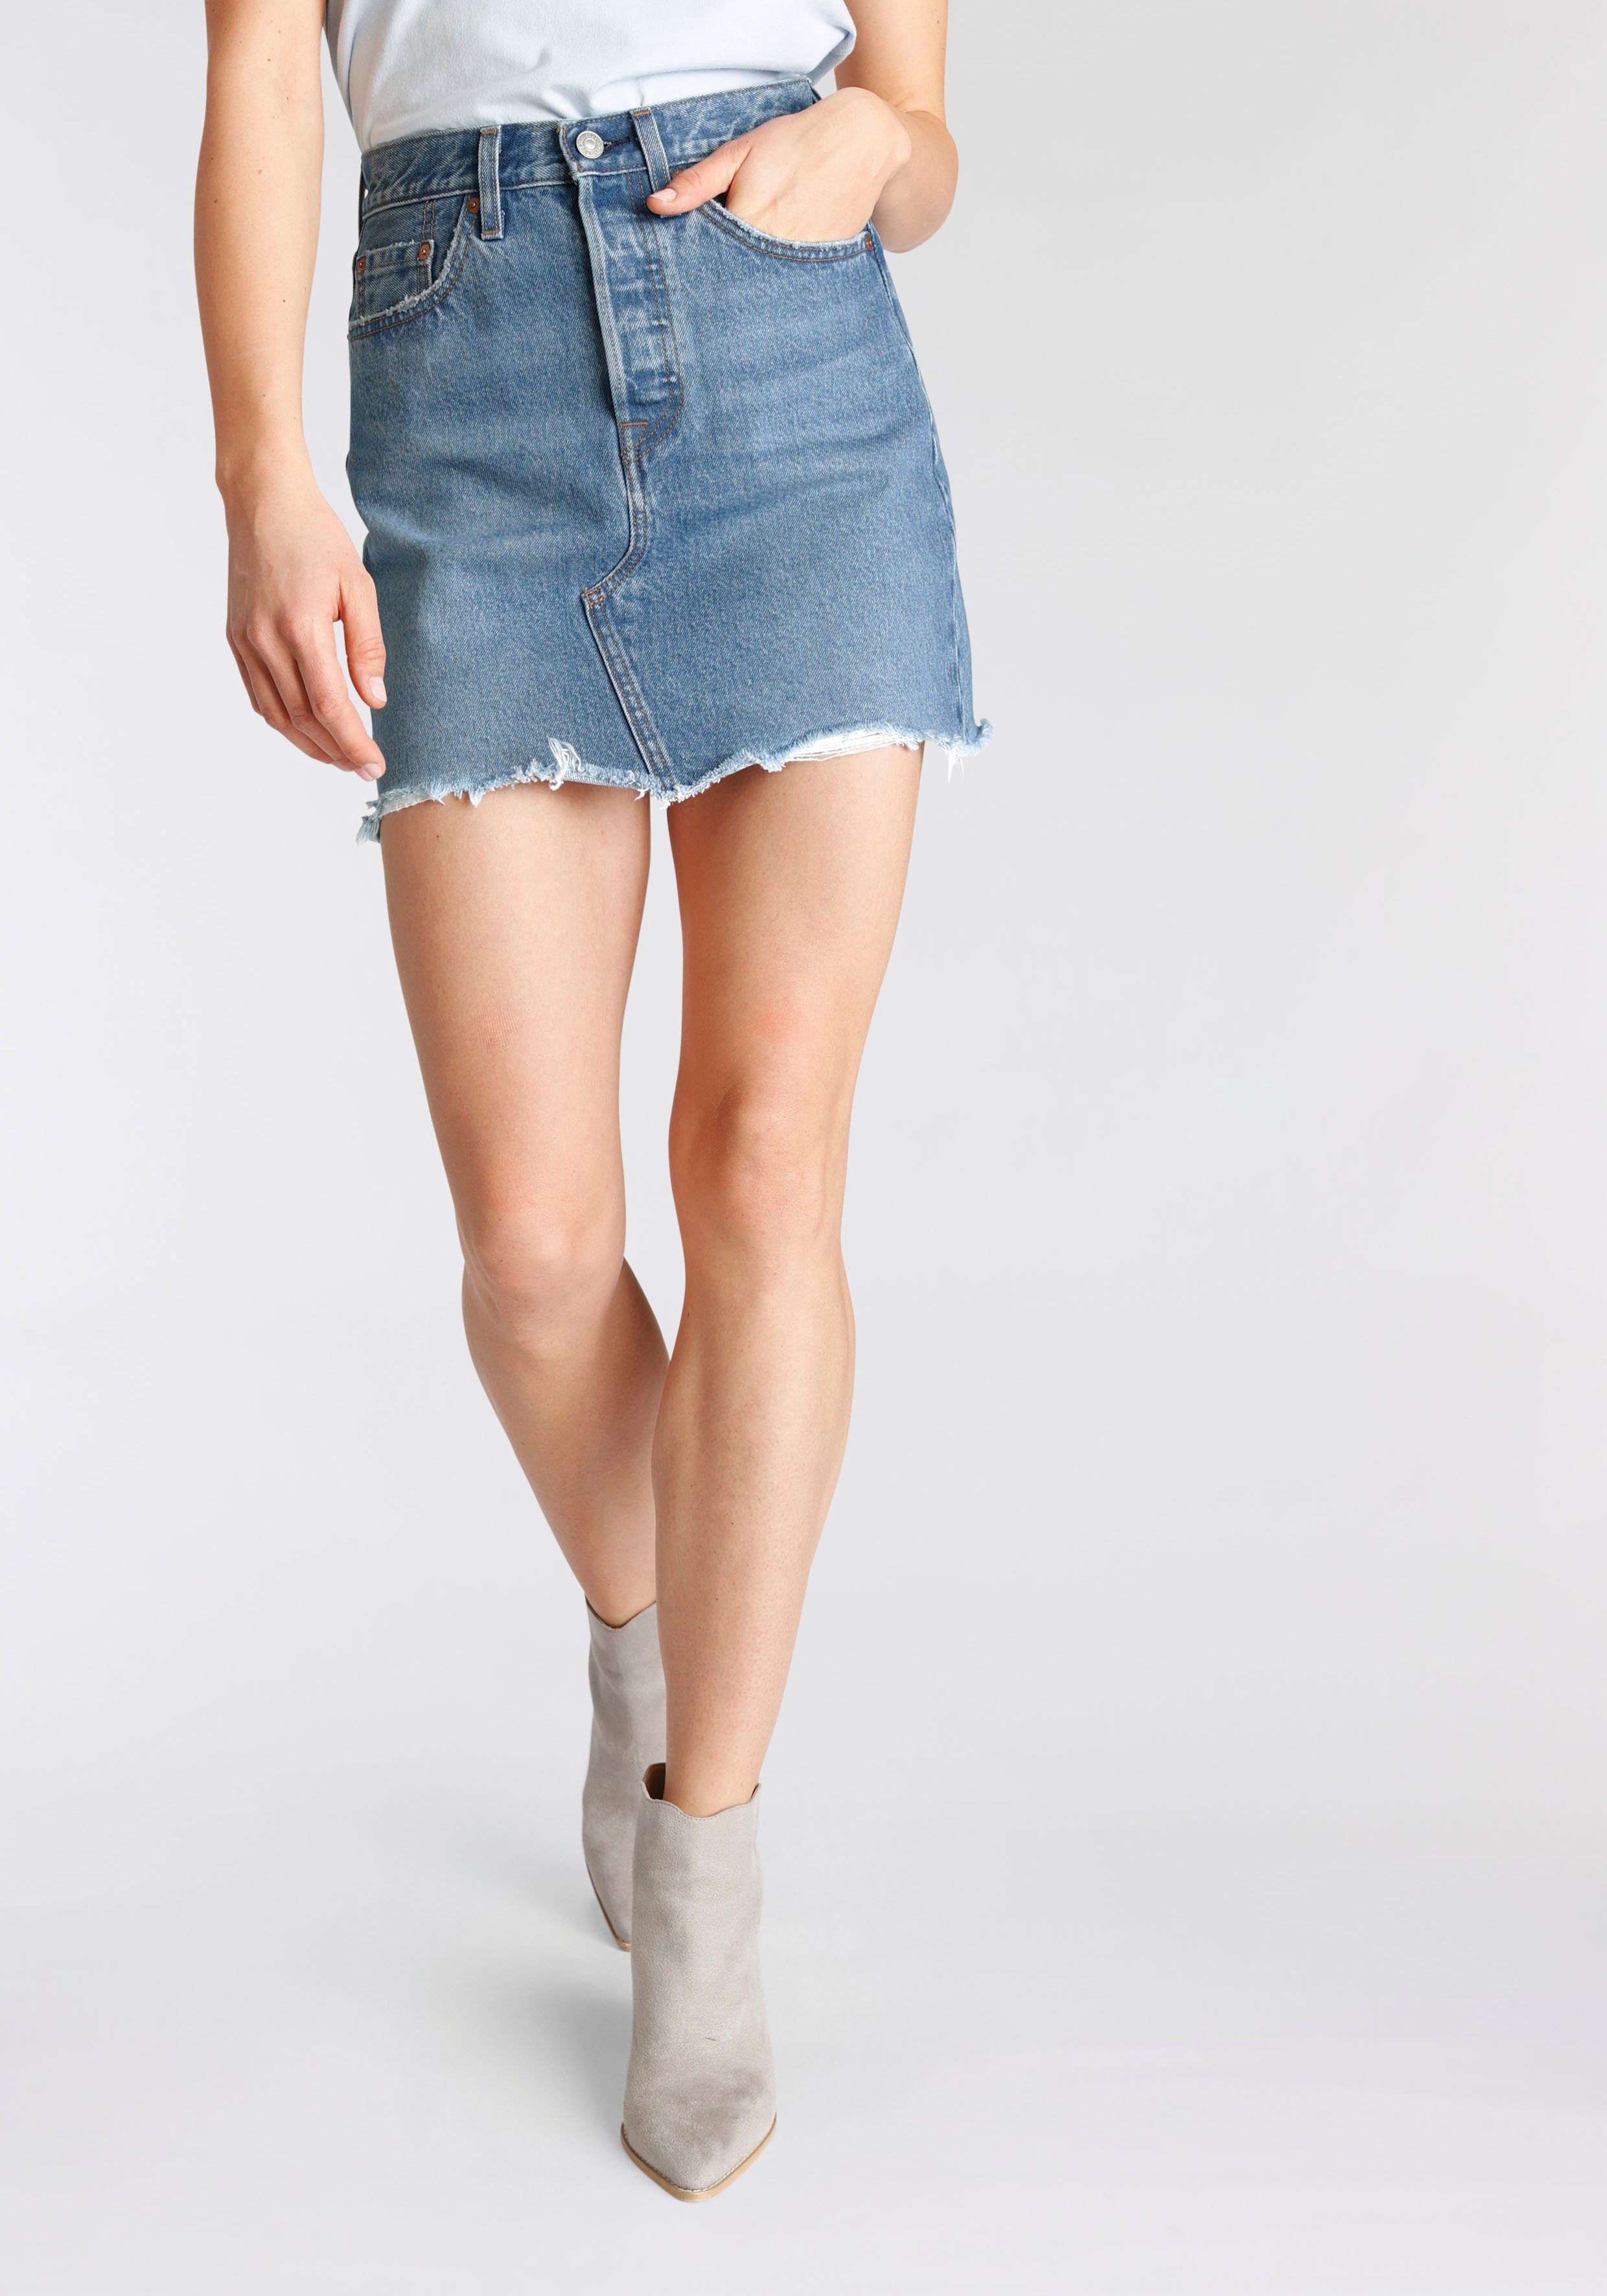 Levi's® Jeansrock »High Rise Iconic Skirt« Jeansrock mit Fransen und hoher  Taille online kaufen | OTTO